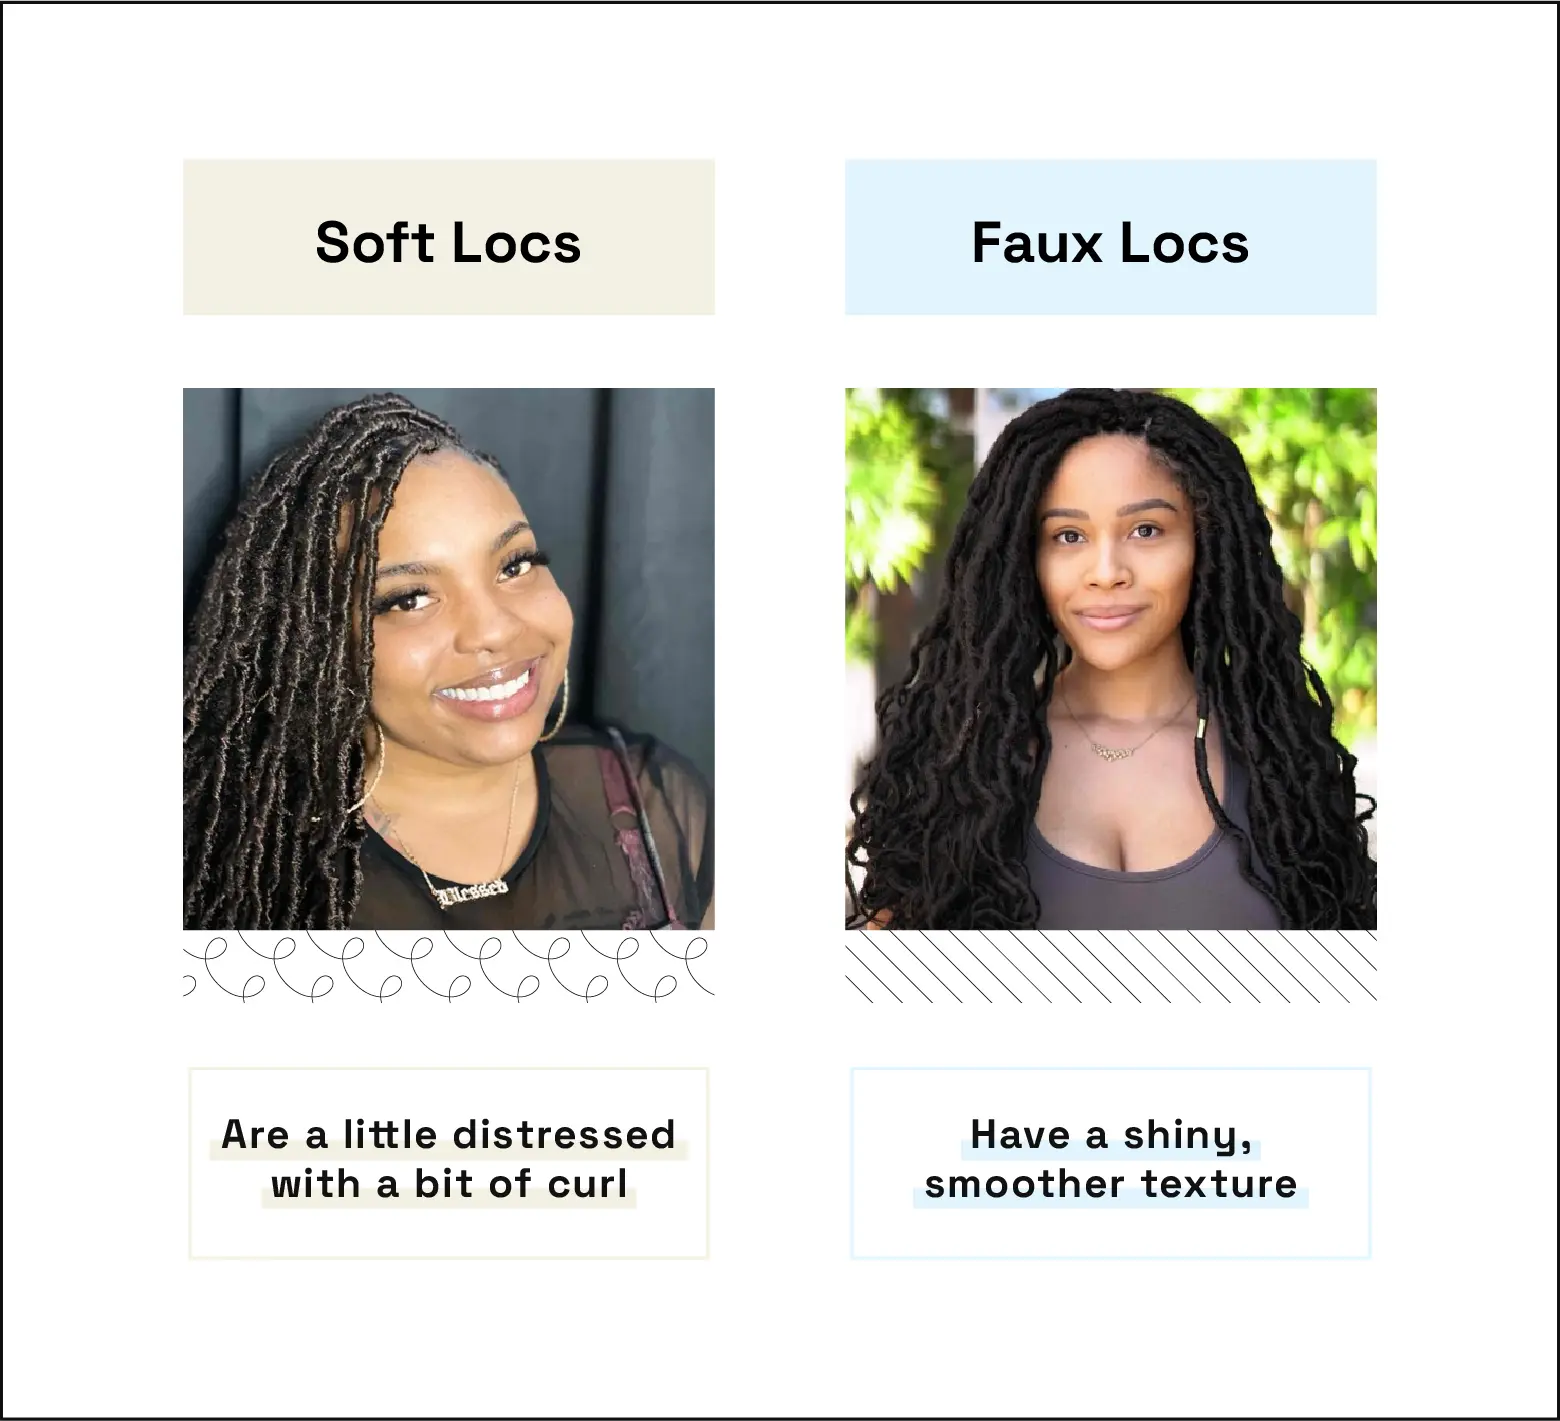 Image explains the difference between soft locs and faux locs.